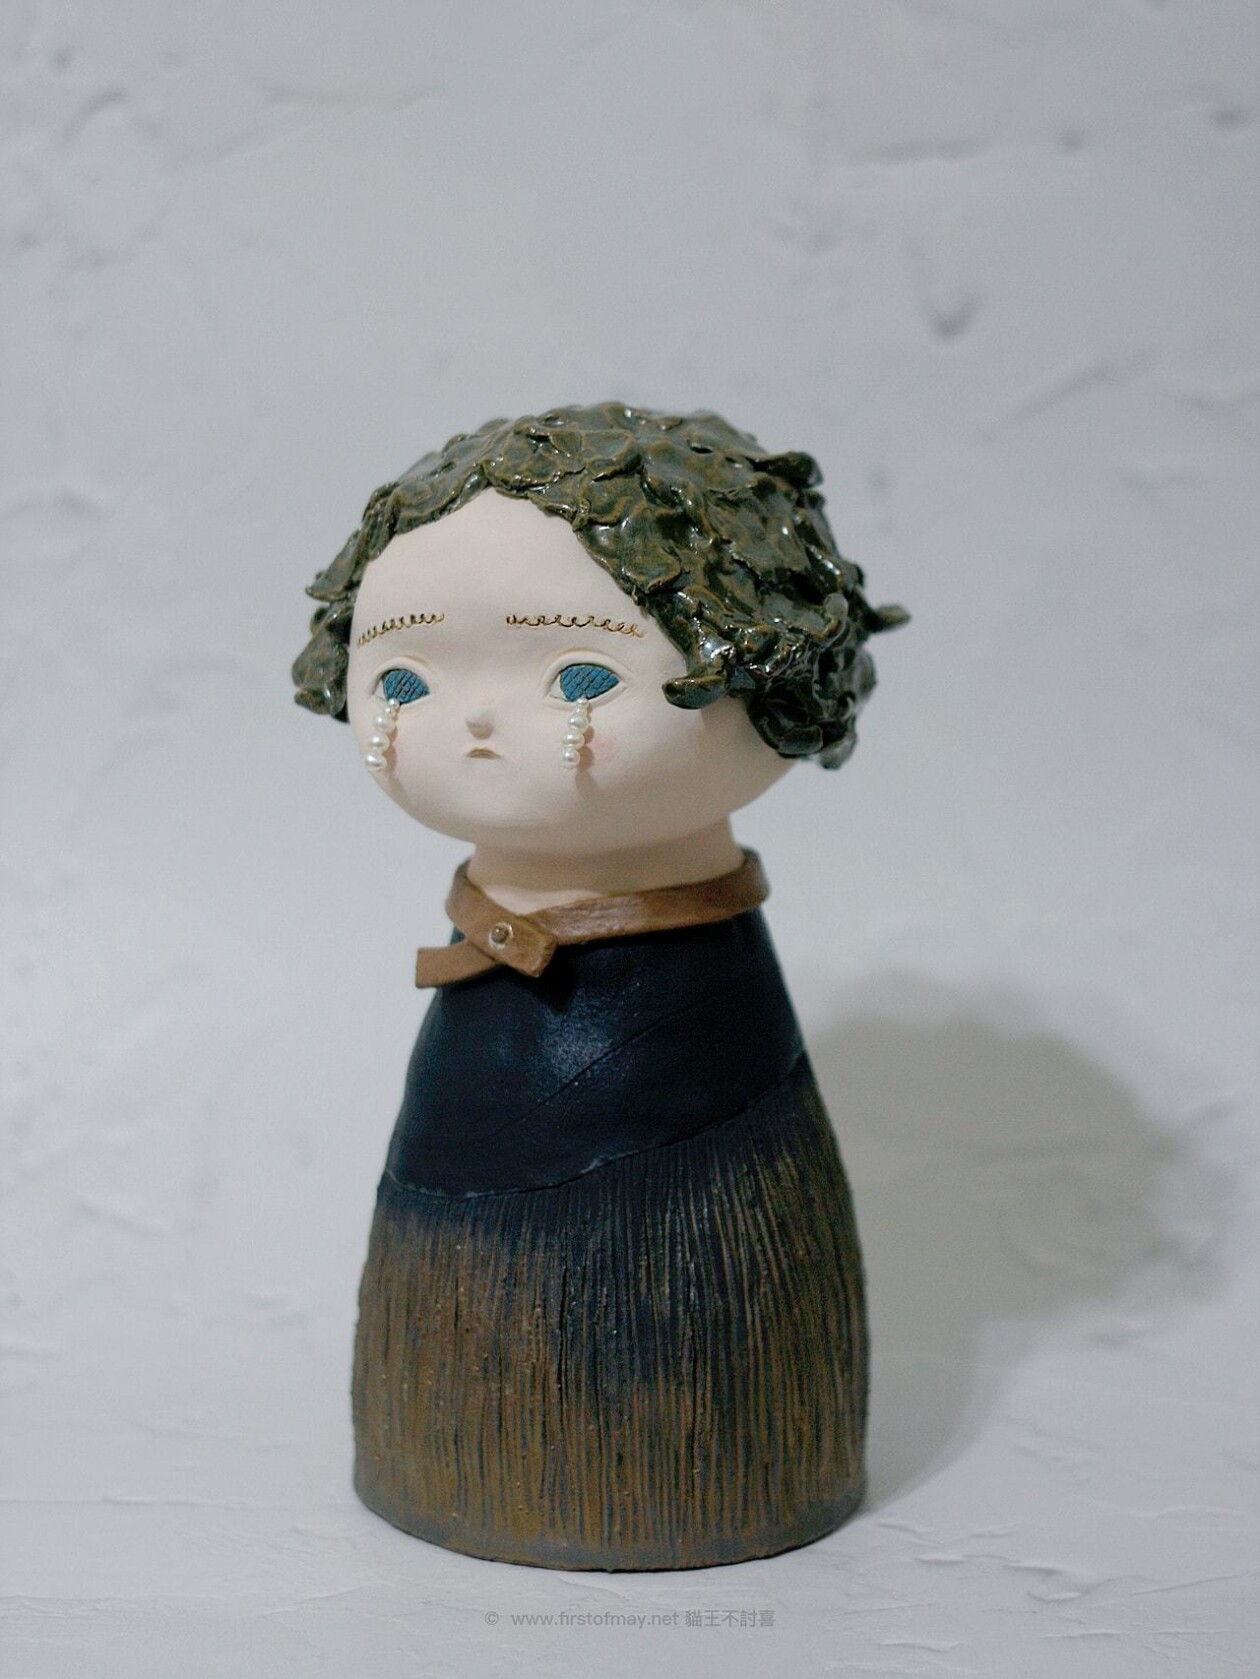 Delicate Ceramic Sculptures Of Figures Crying Pearls By First Of May Studio (12)